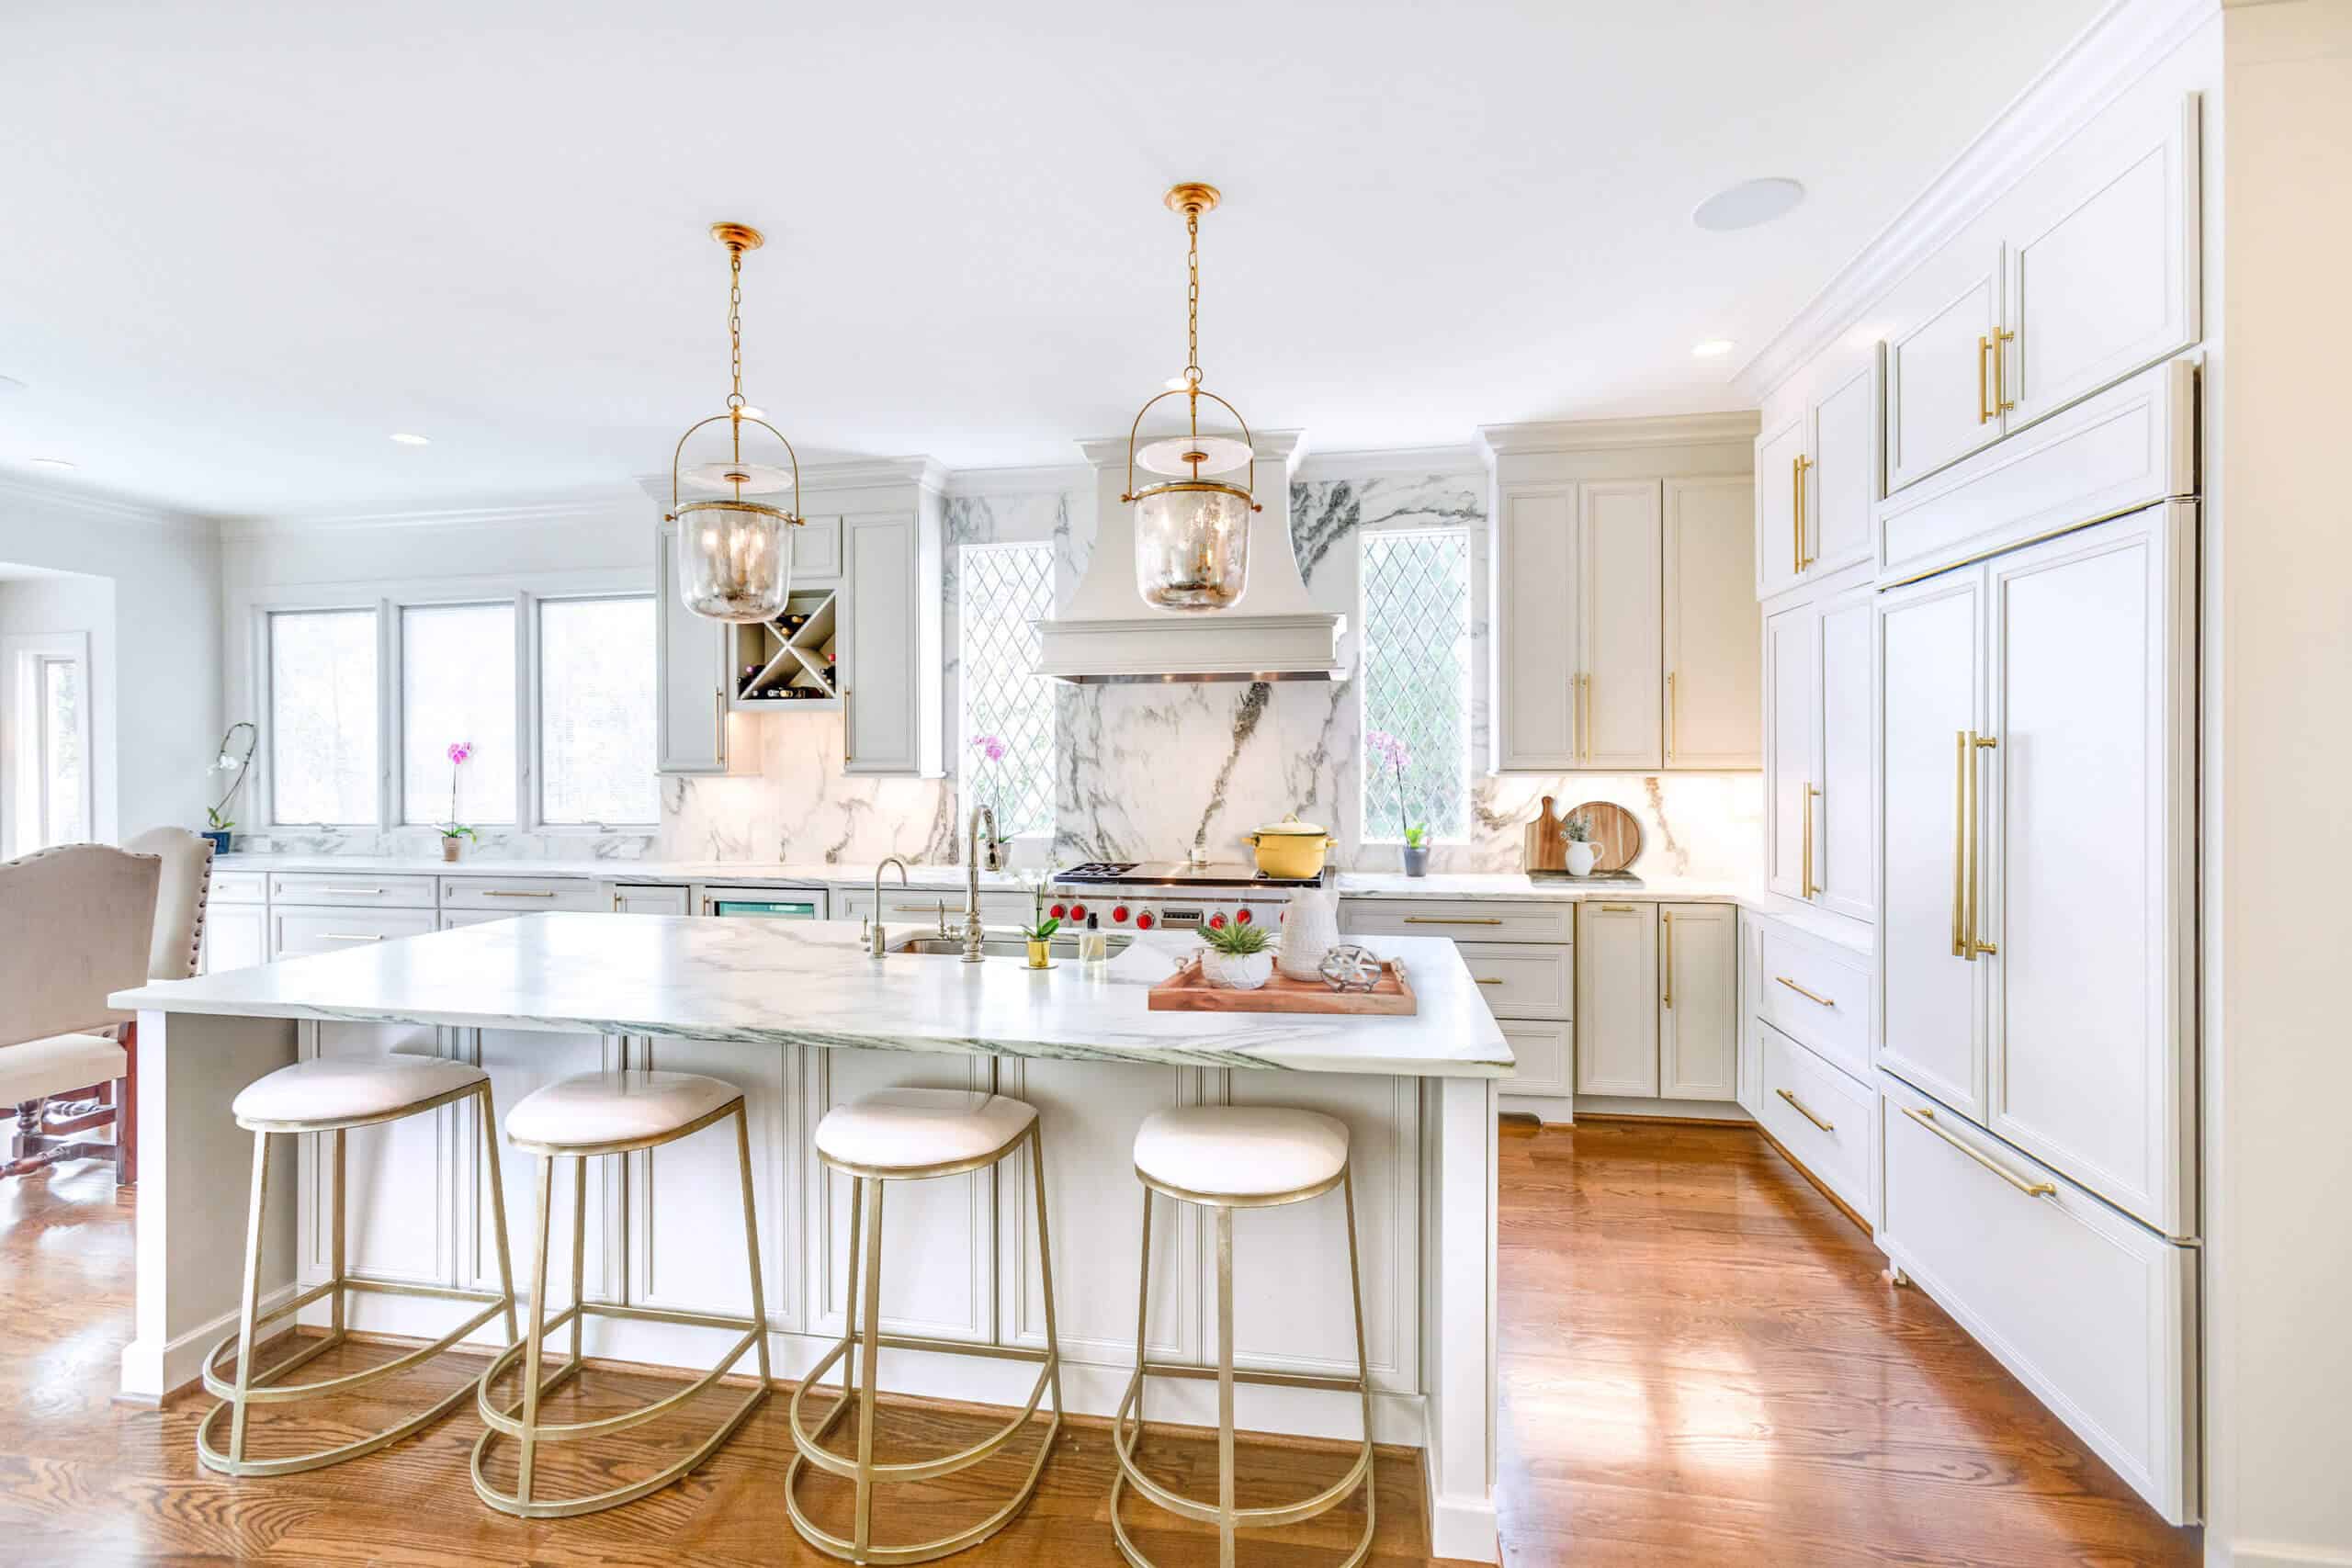 white kitchen with gold pull handles on cabinets with a large center island and bar seating